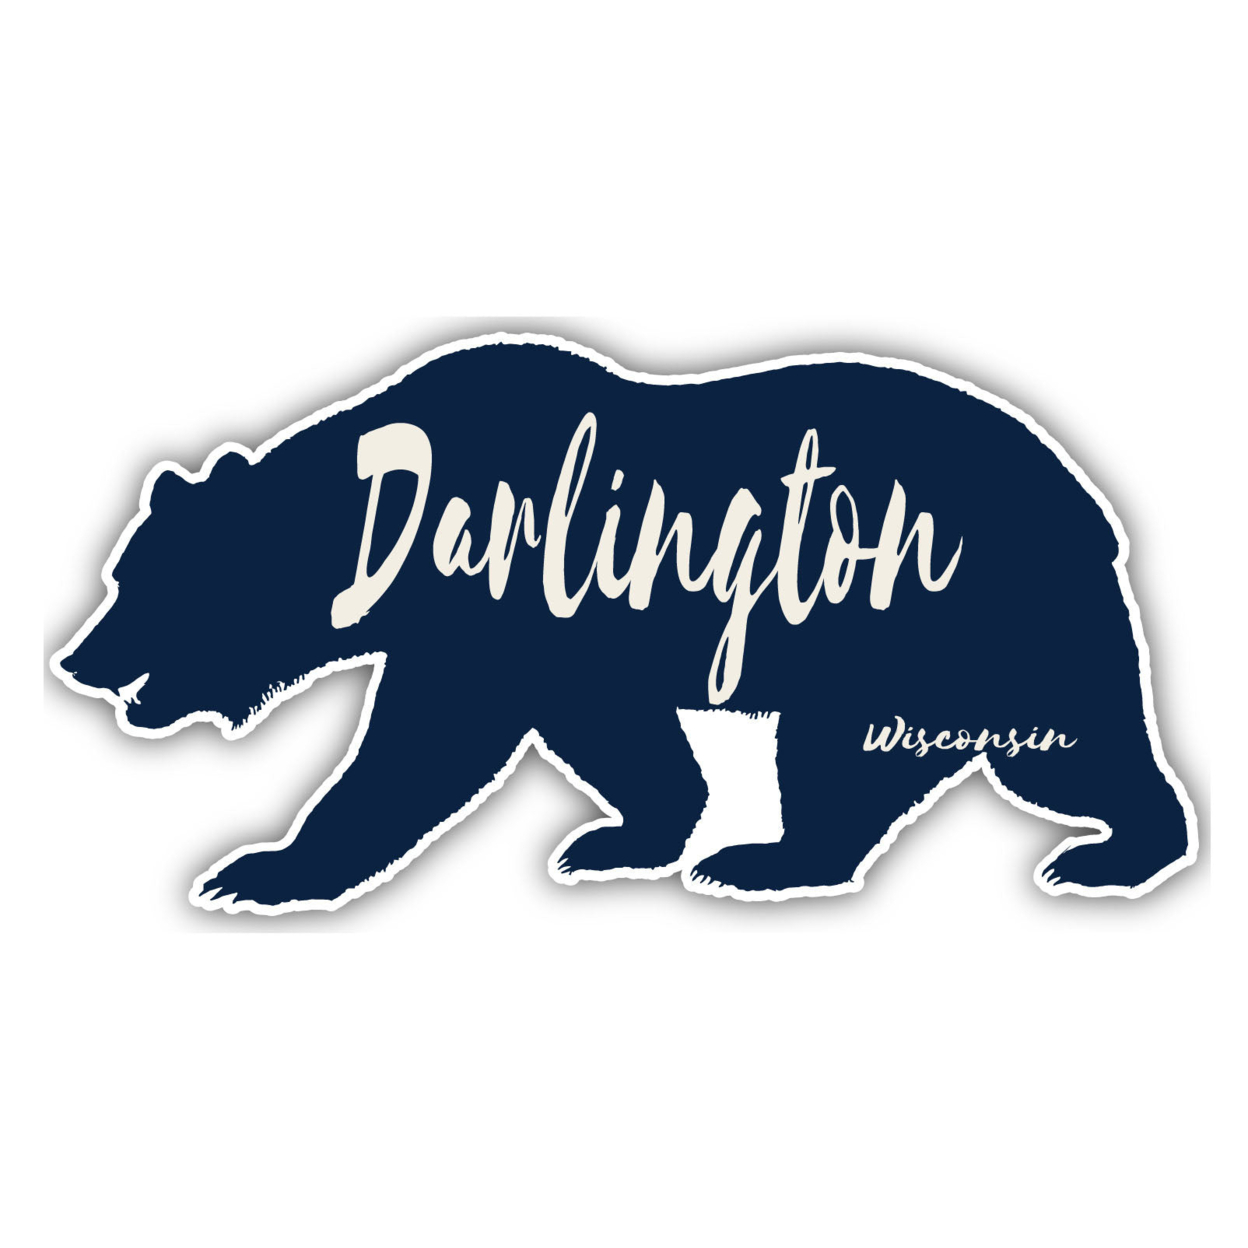 Darlington Wisconsin Souvenir Decorative Stickers (Choose Theme And Size) - 4-Pack, 8-Inch, Bear